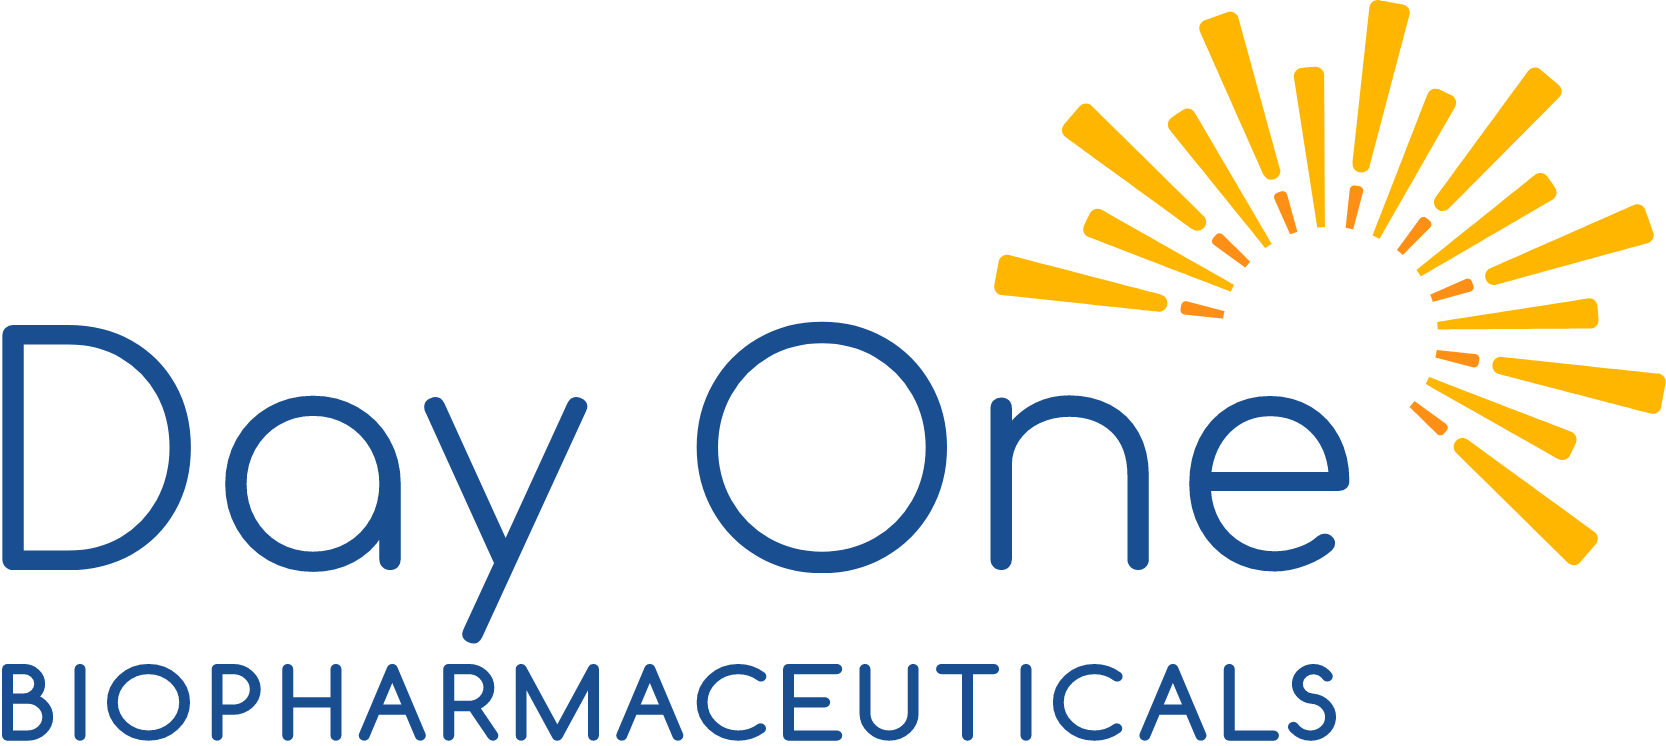 Day One Biopharmaceuticals logo large (transparent PNG)